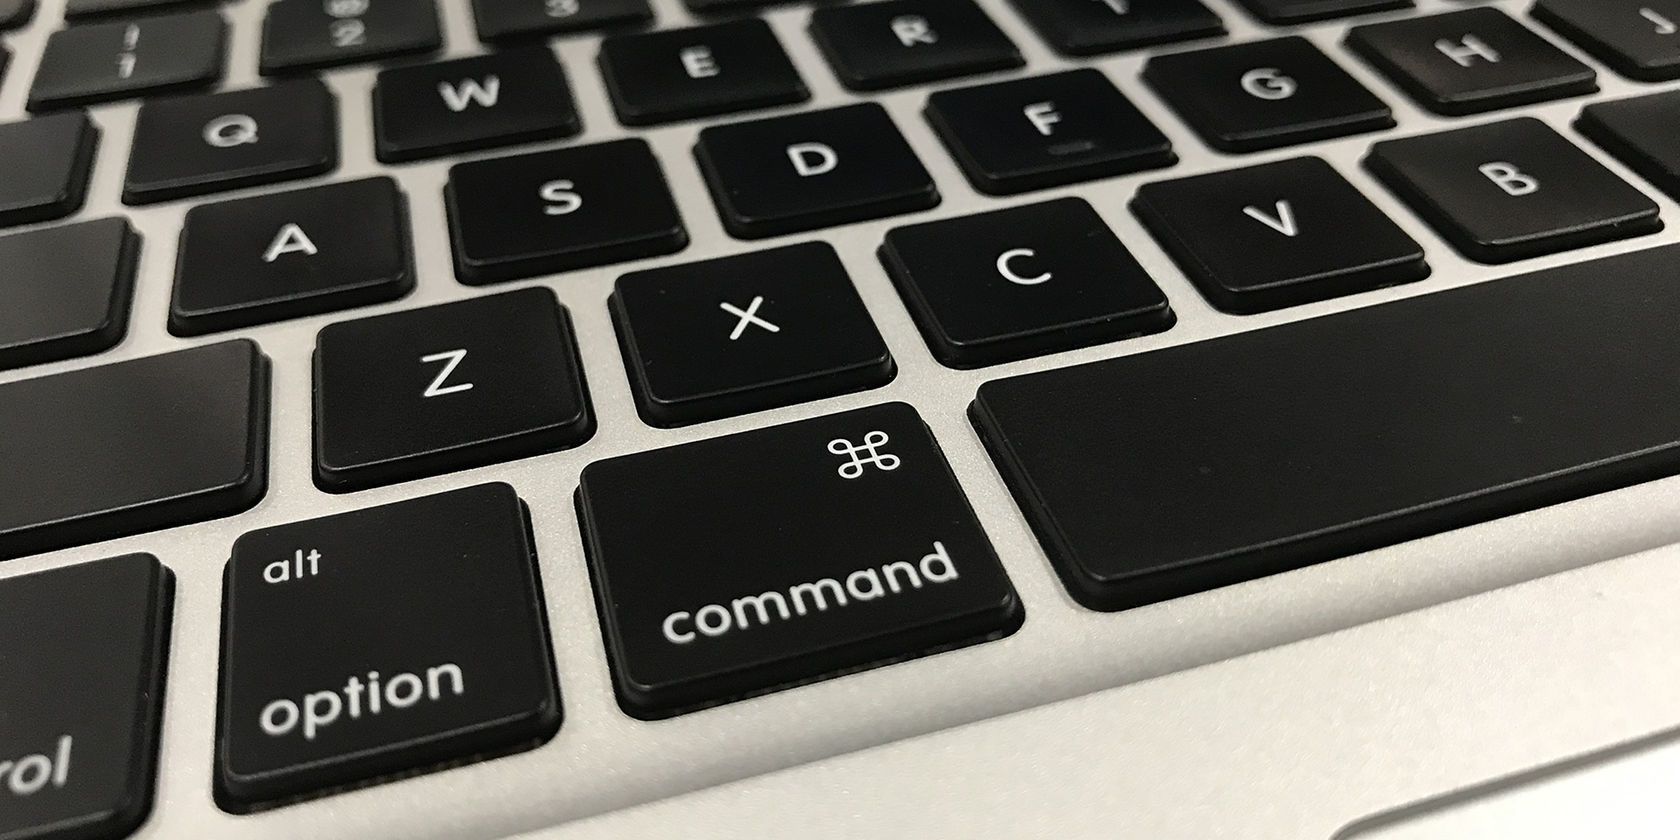 copy and paste on macbook keyboard